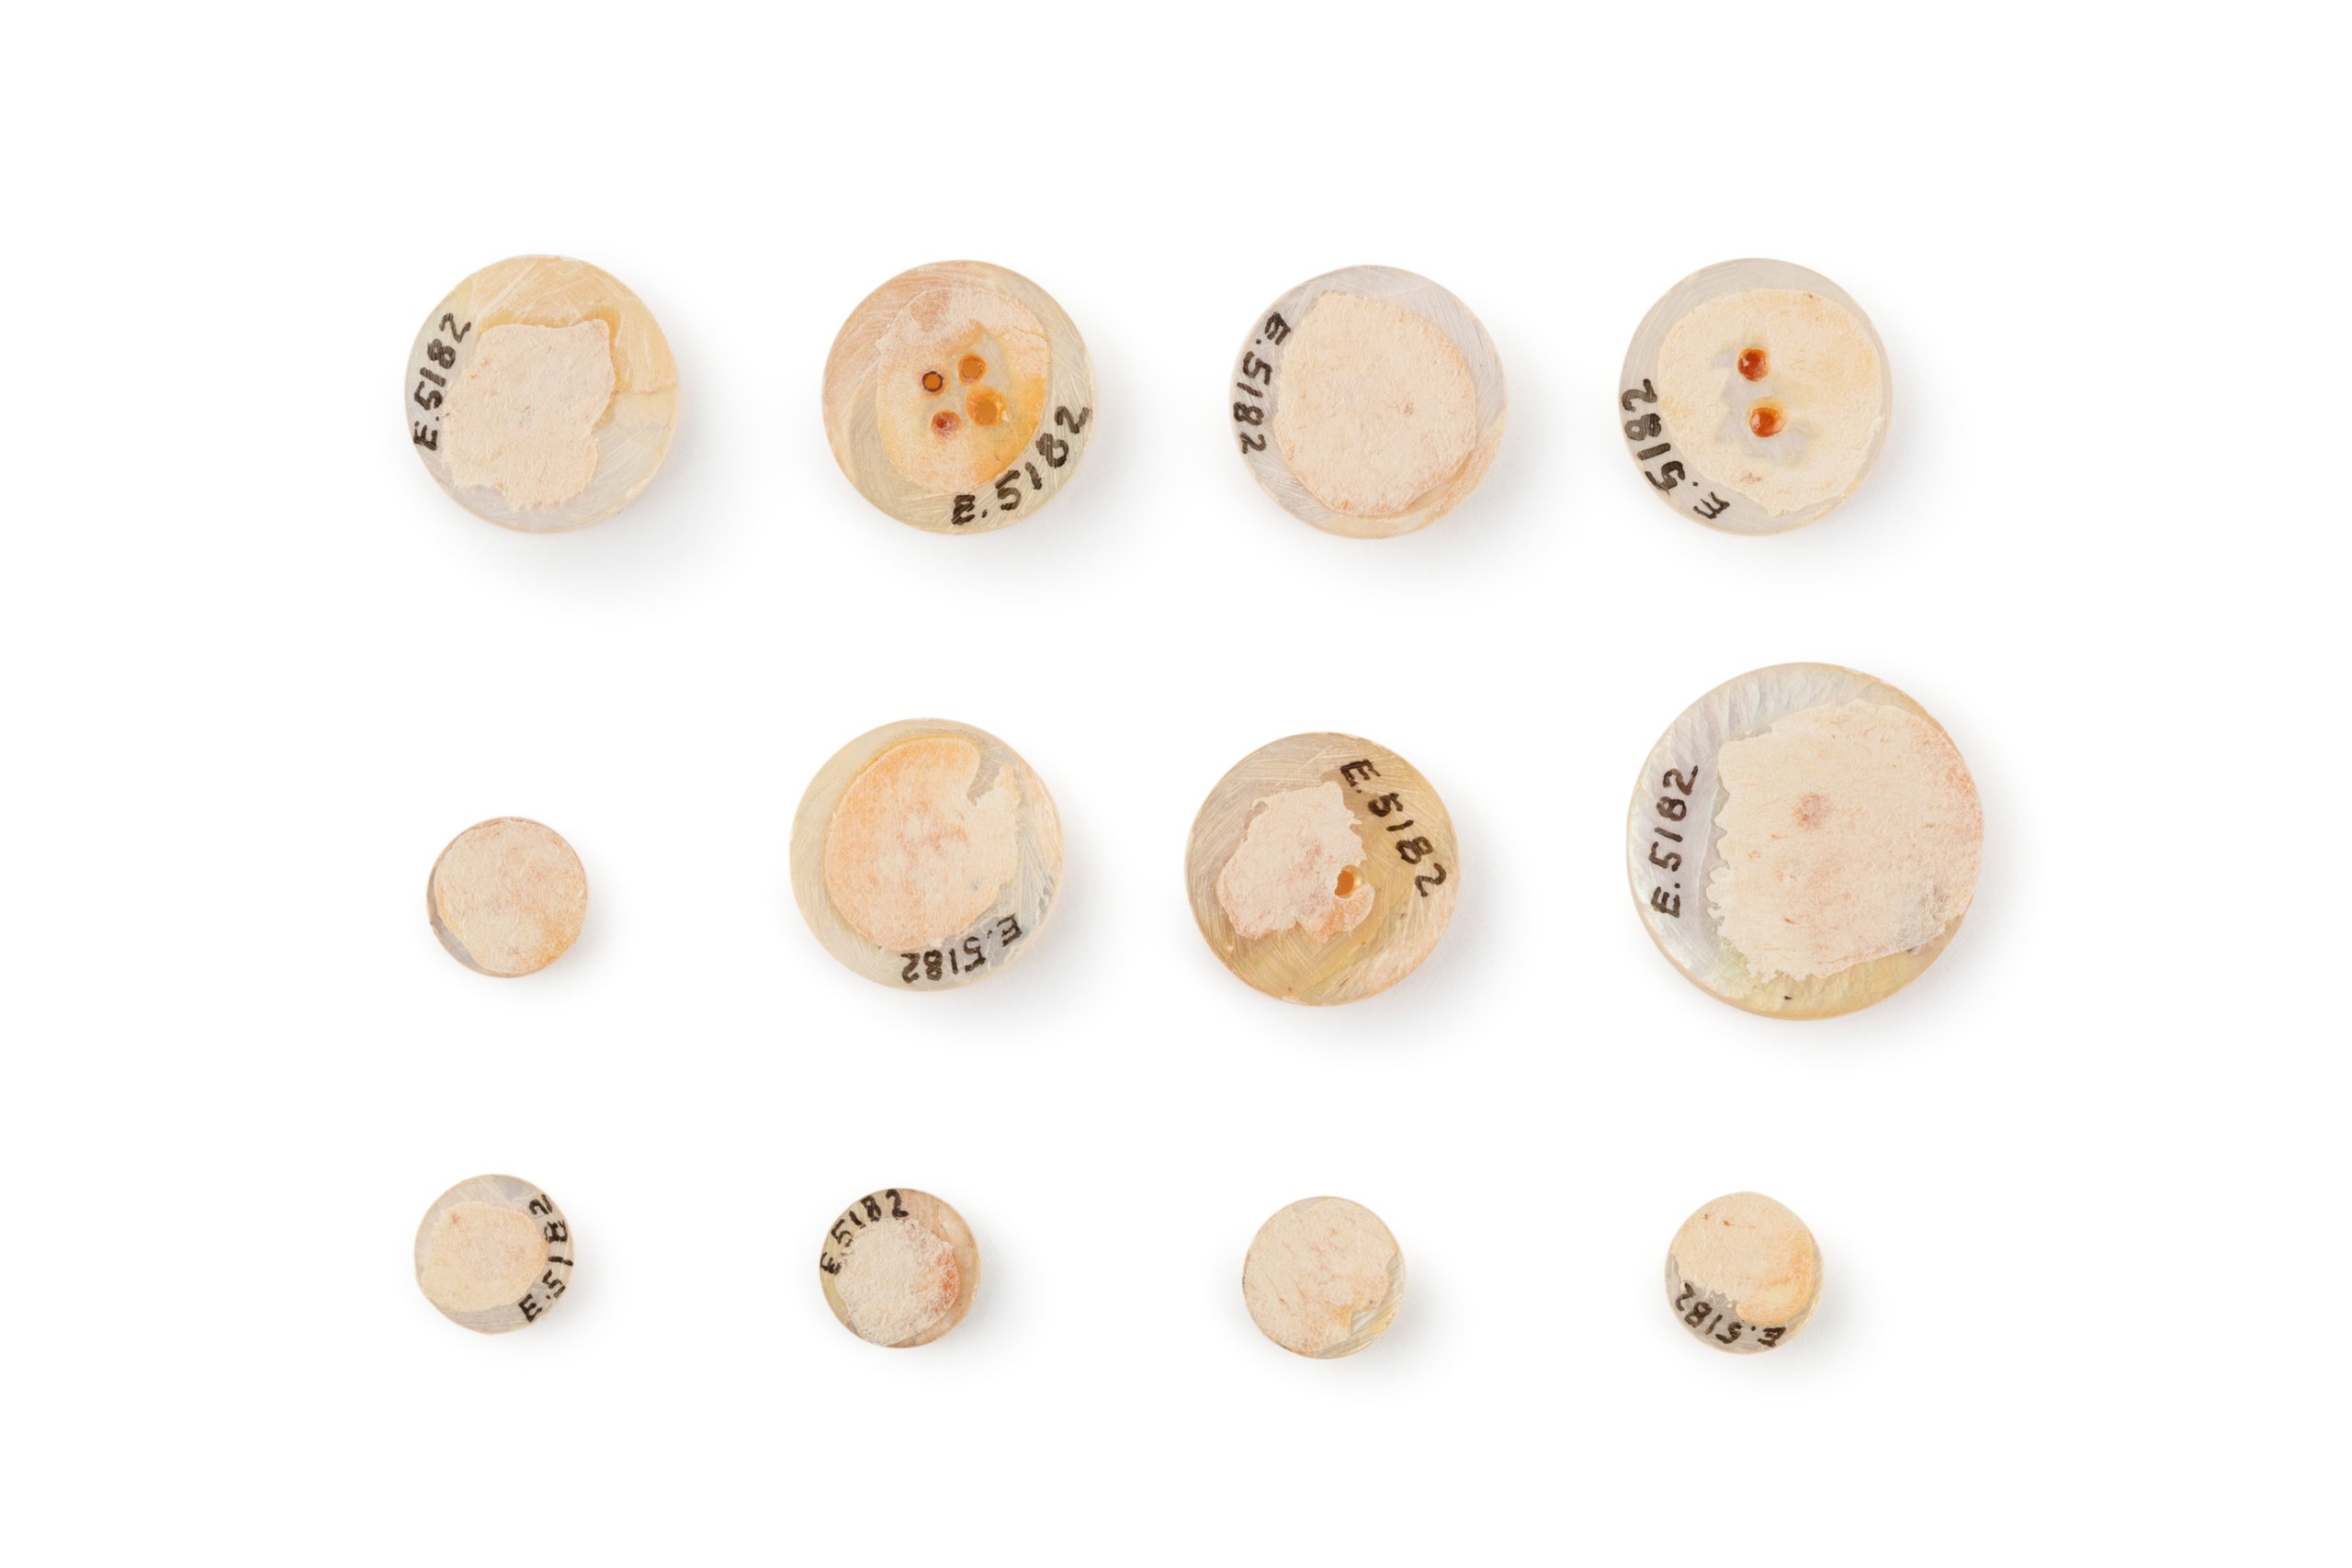 A didactic display illustrating pearl button manufacture